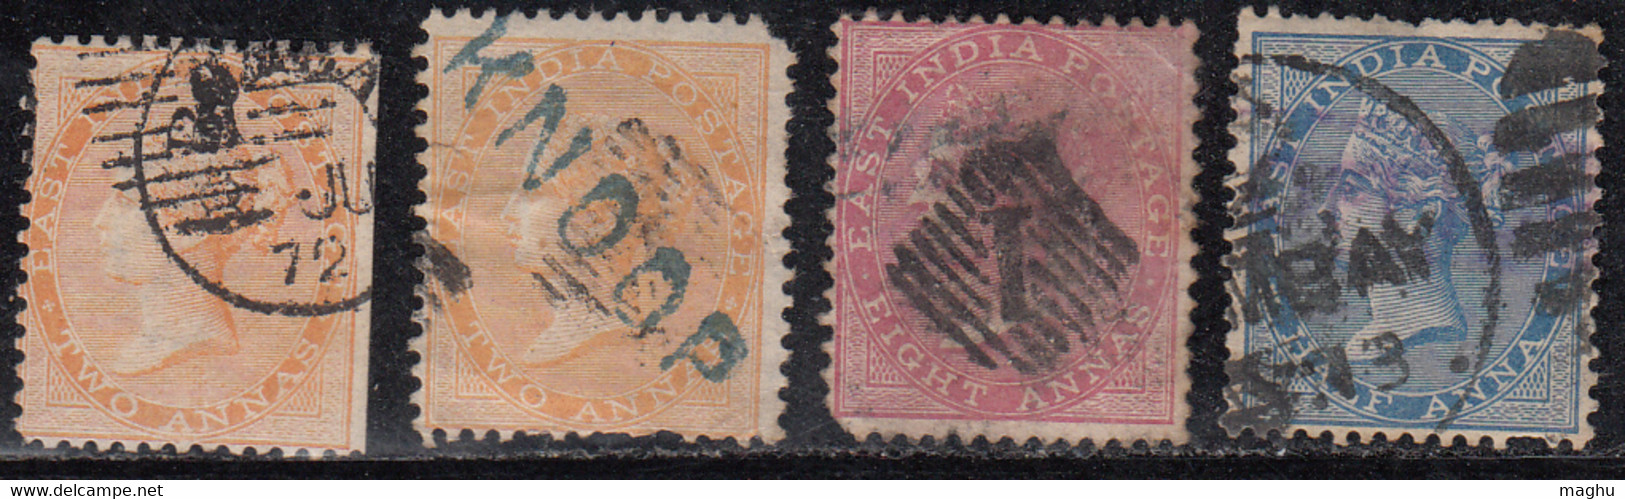 4 Diff., BOMBAY Cancellation, JC Tpye 4 And Local Varities On QV British East India Used, (stamps Damaged) - 1854 East India Company Administration